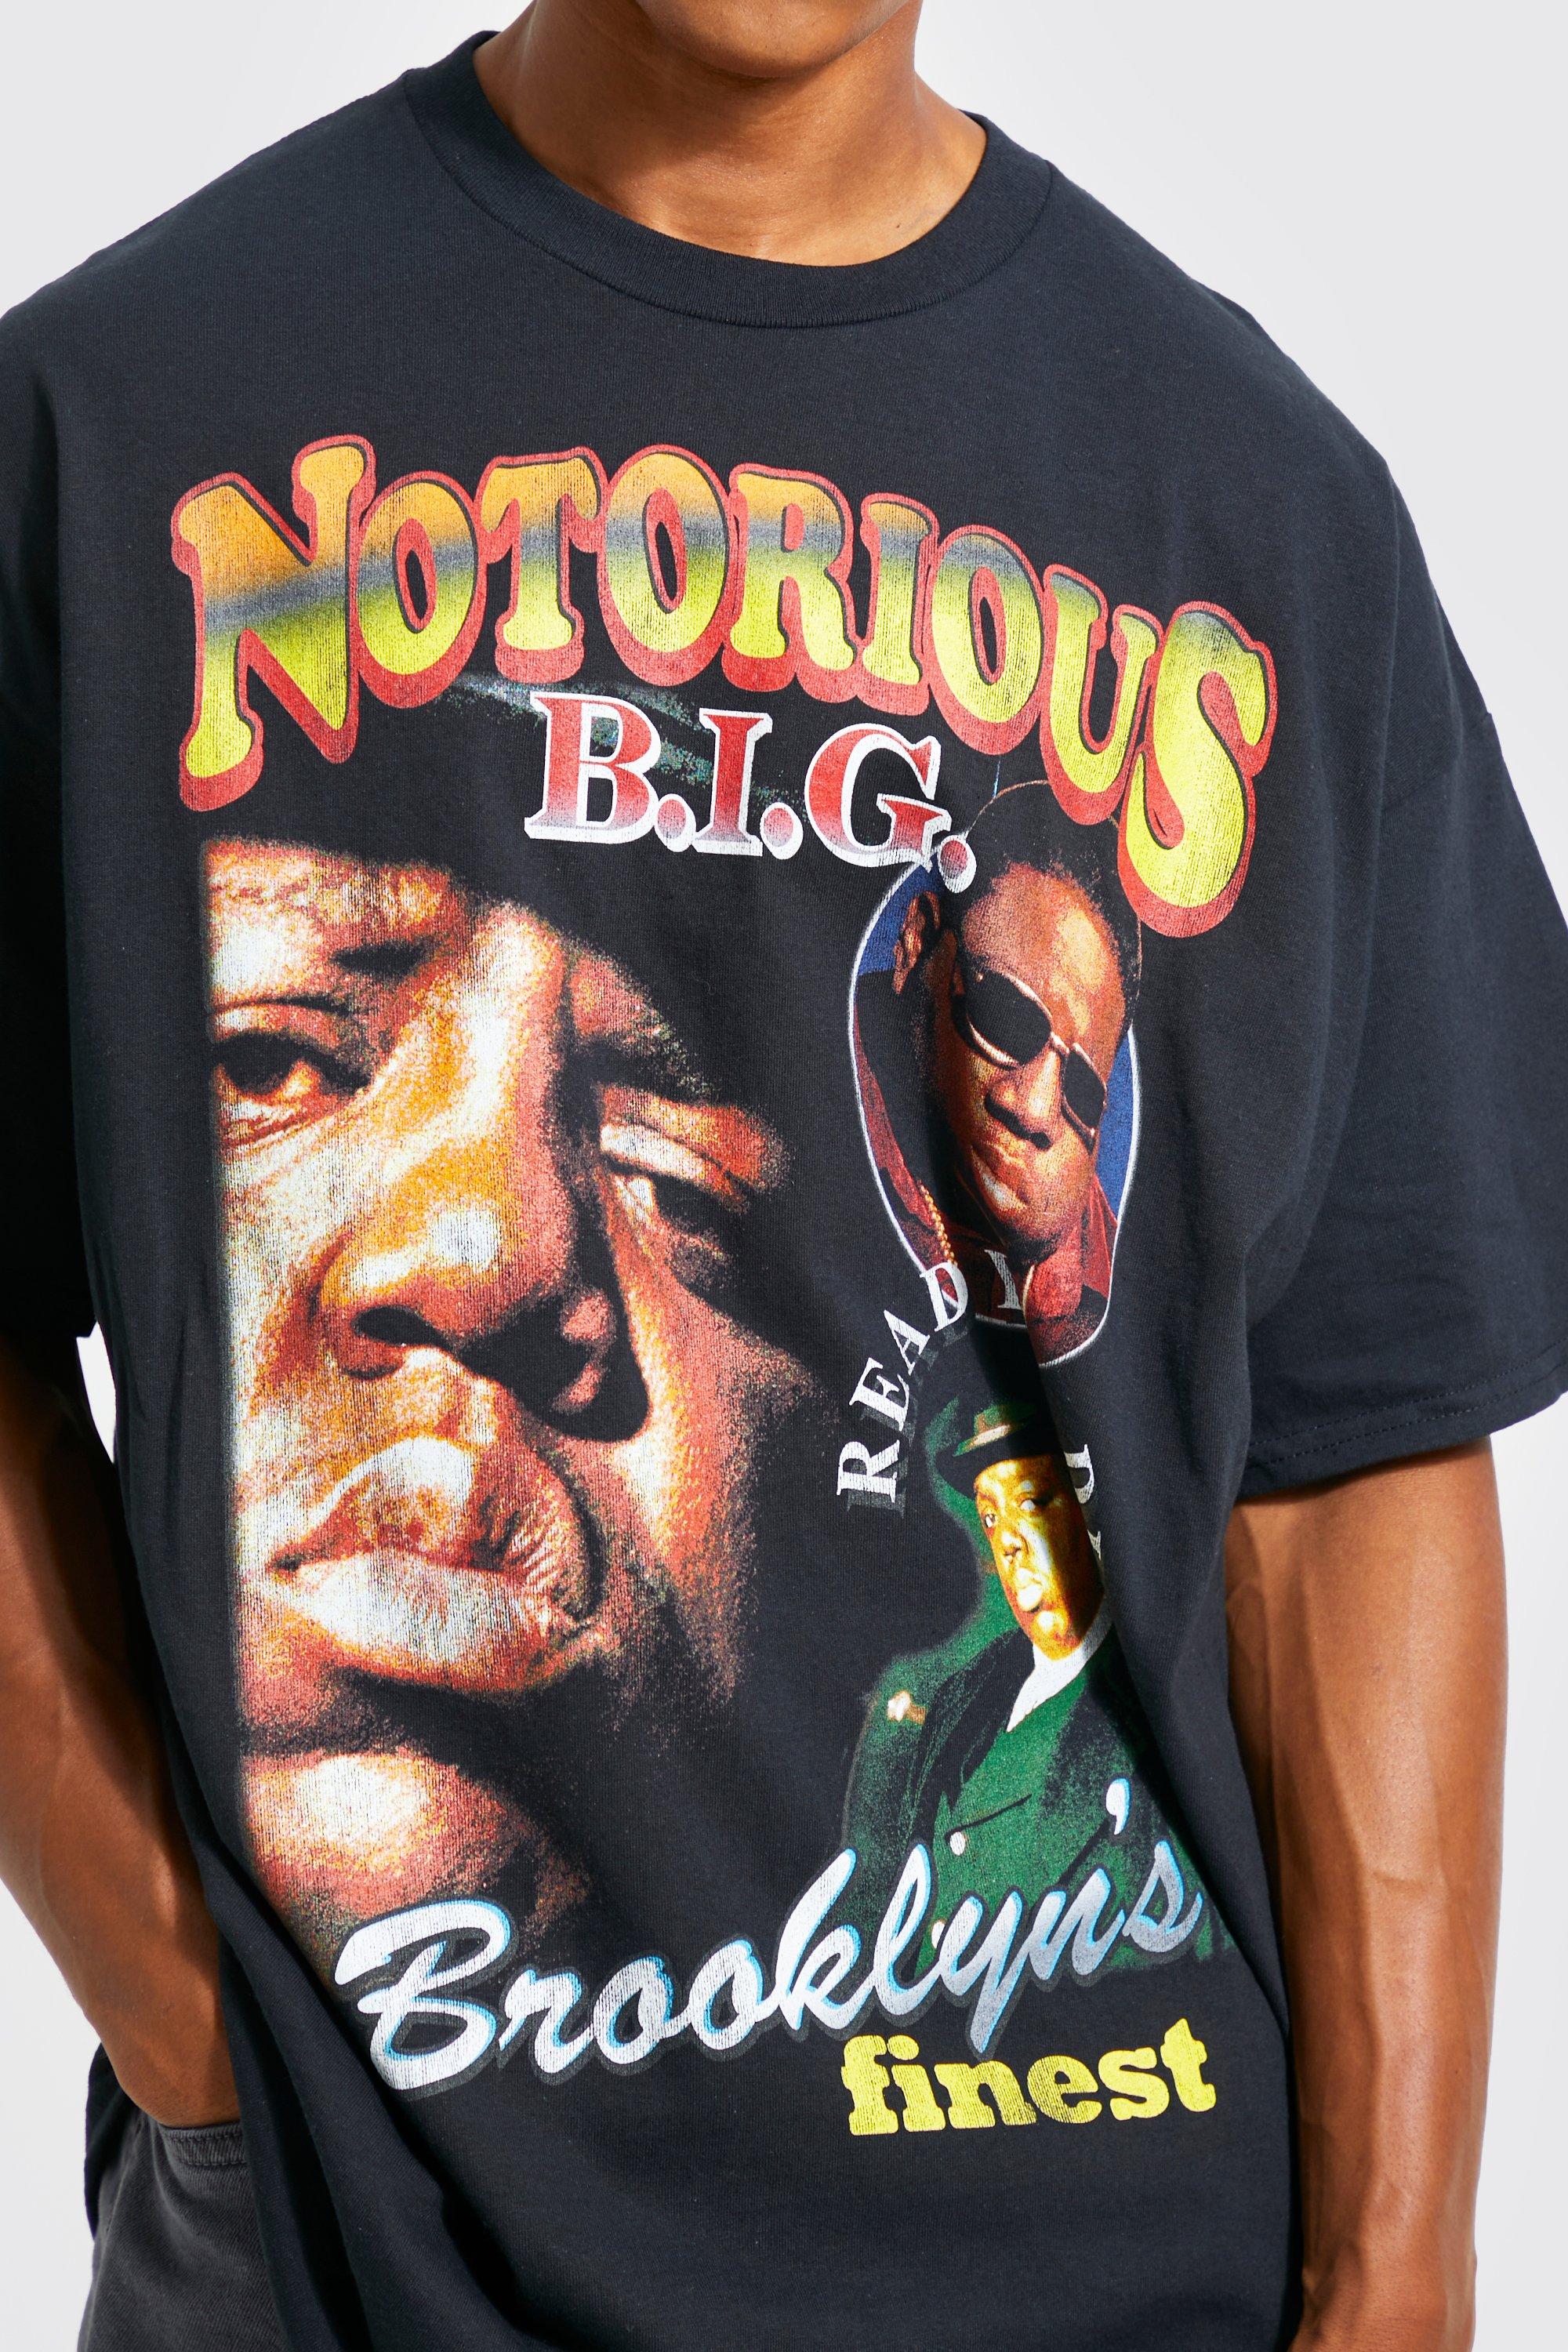 The Notorious B.I.G. Rap Tee 追悼 Vintage - Tシャツ/カットソー